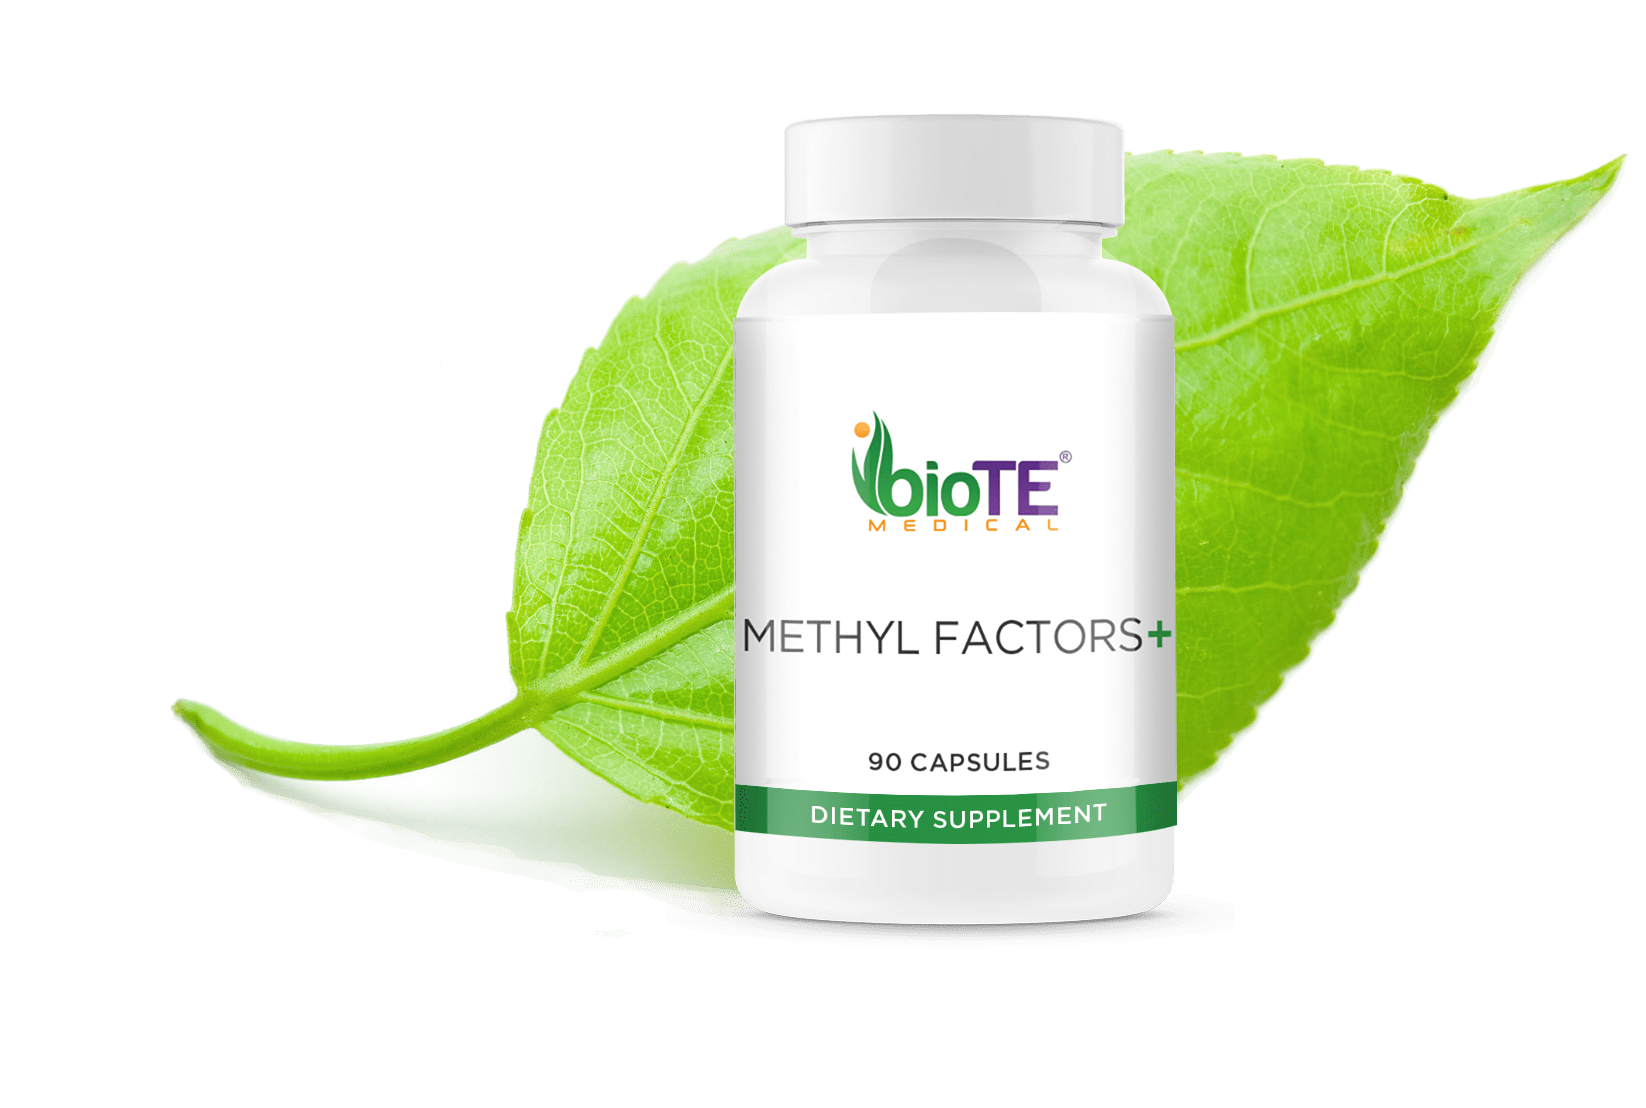 06_Nutraceuticals_DT_Products_Methyl Factors